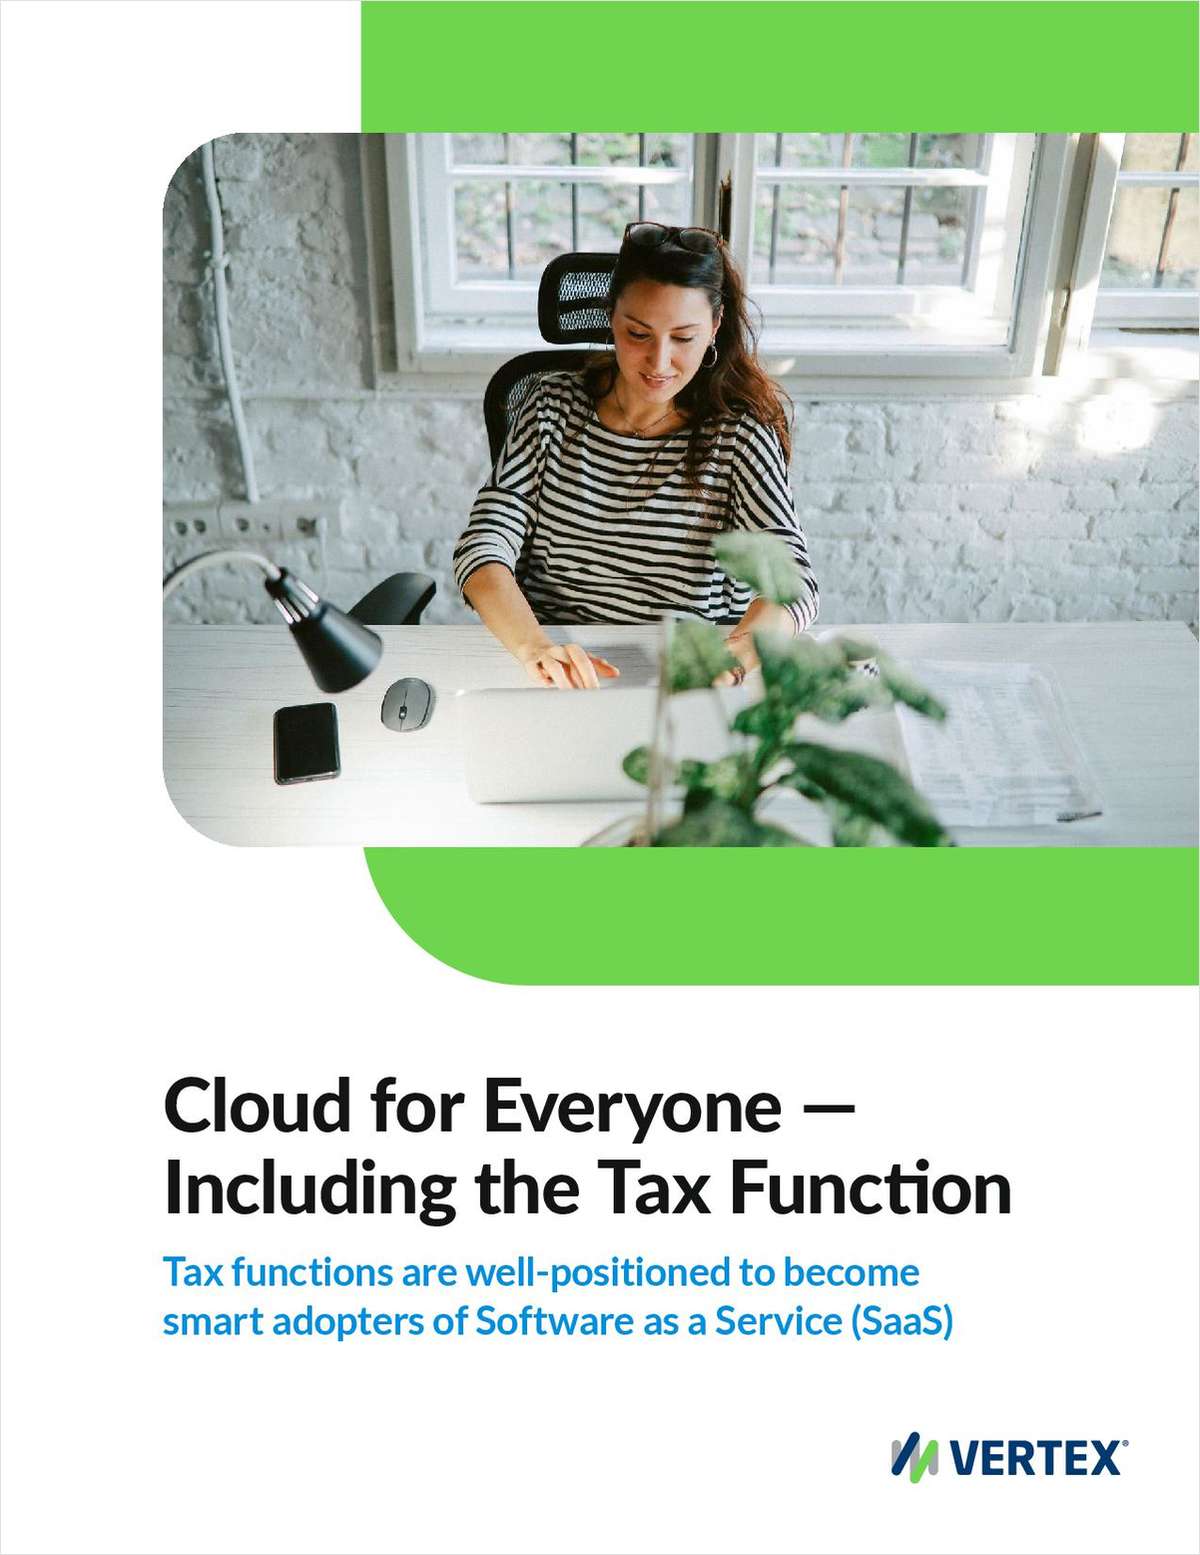 Cloud for Everyone -- Including the Tax Function